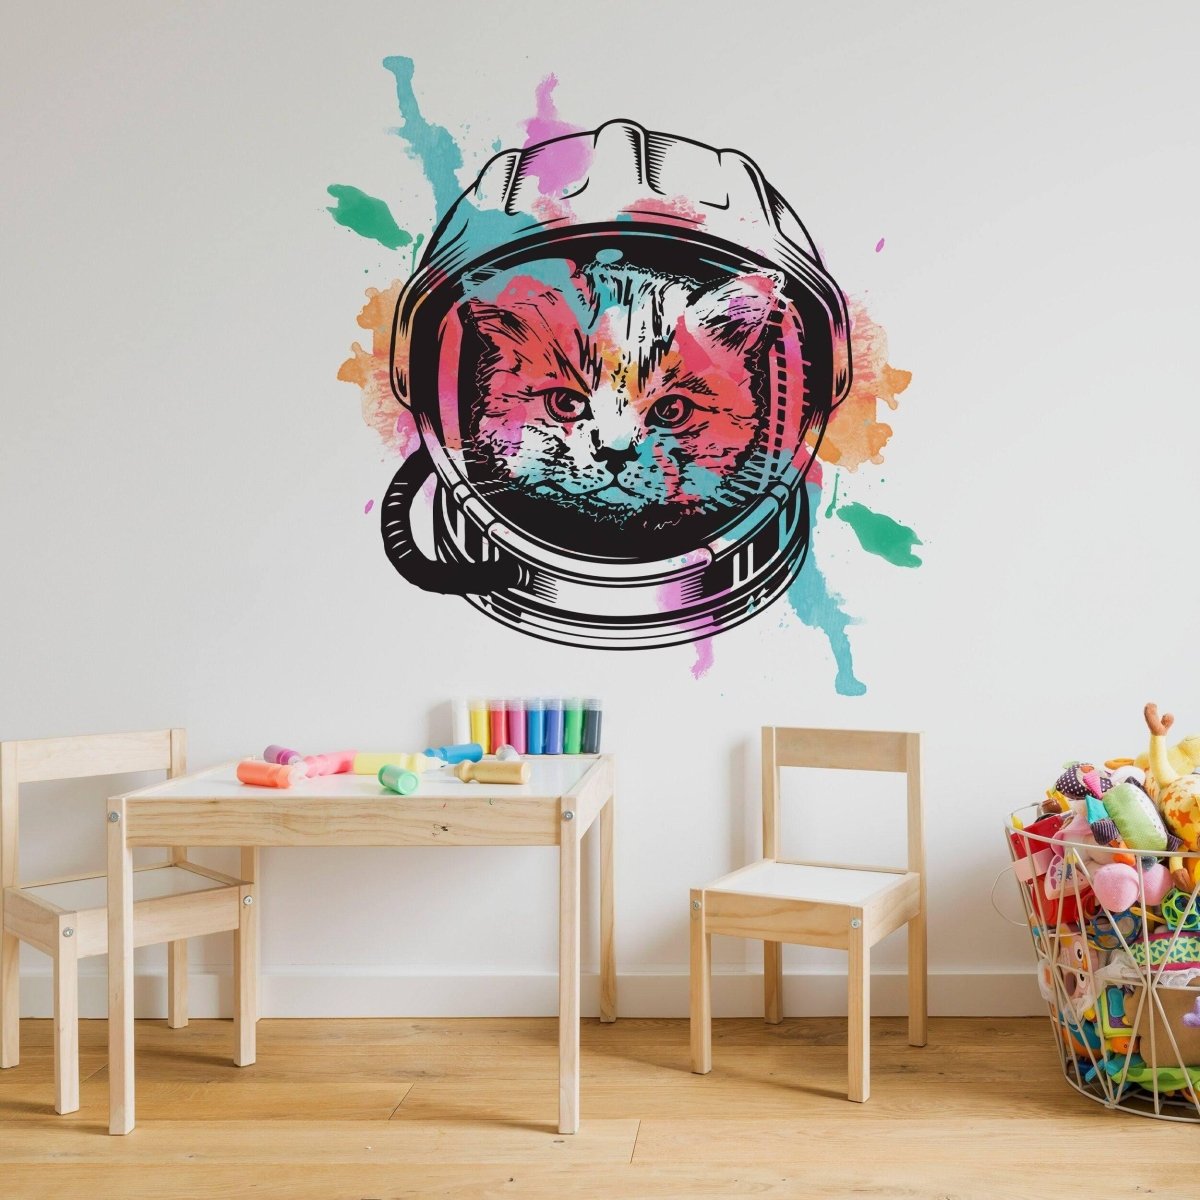 Astronaut Kitty Wall Decal - Whimsical Space Cat Decor - Decords